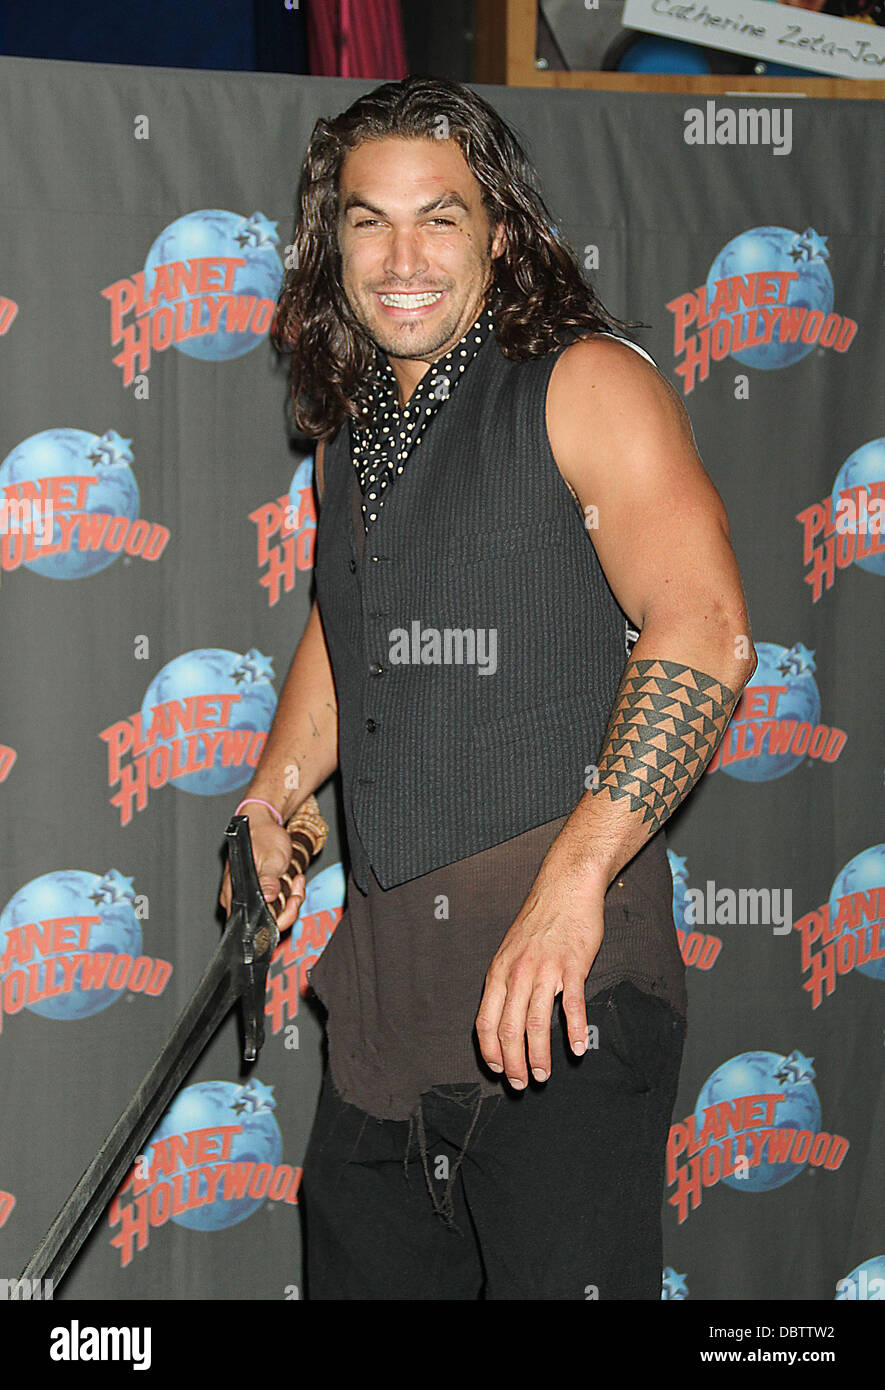 Jason Momoa promotes his starring role in 'Conan the Barbarian' with a hand print ceremony at Planet Hollywood in Times Square New York City, USA - 18.08.11 Stock Photo